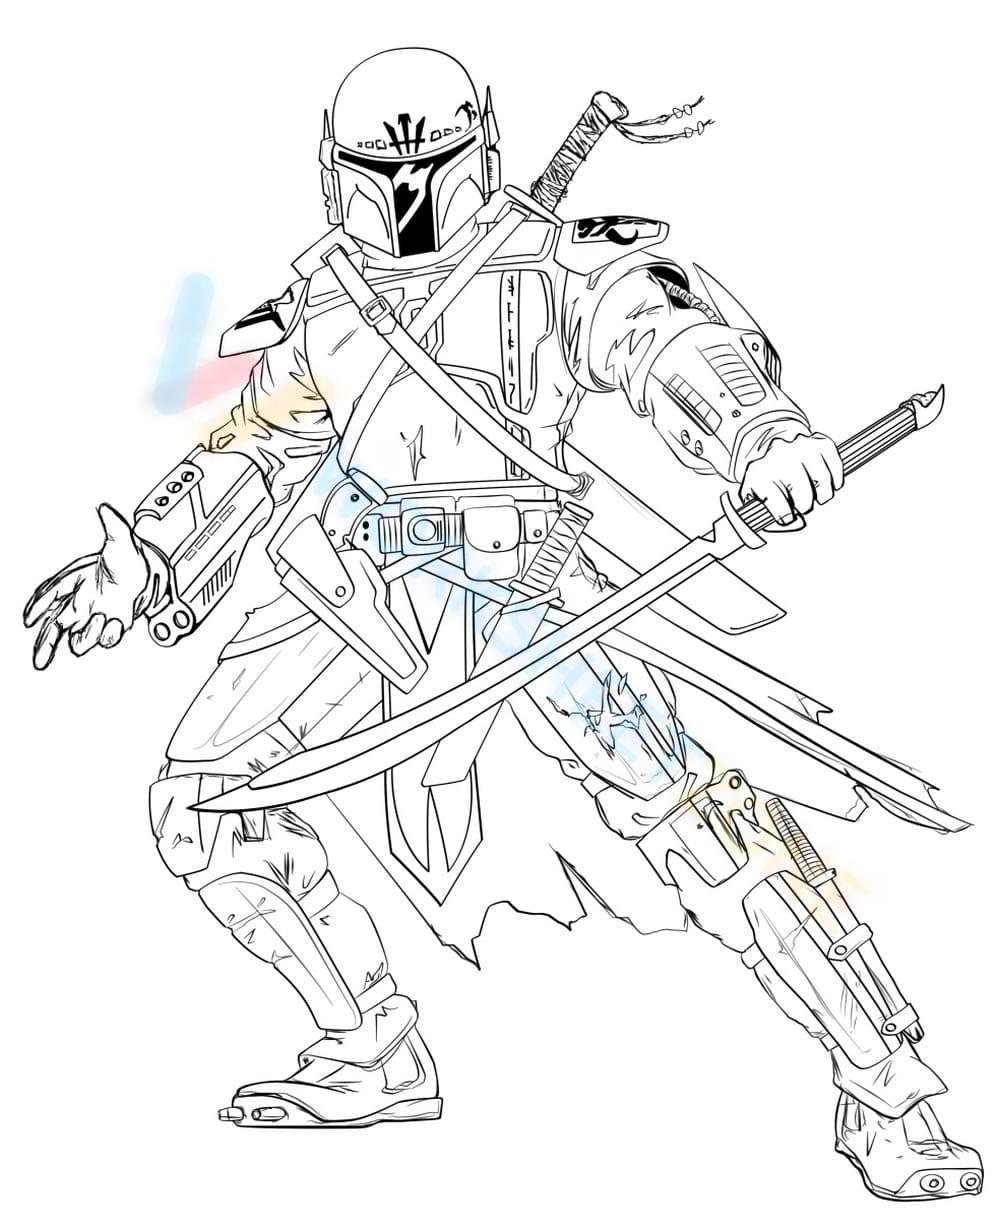 Free printable mandalorian coloring pages for kids